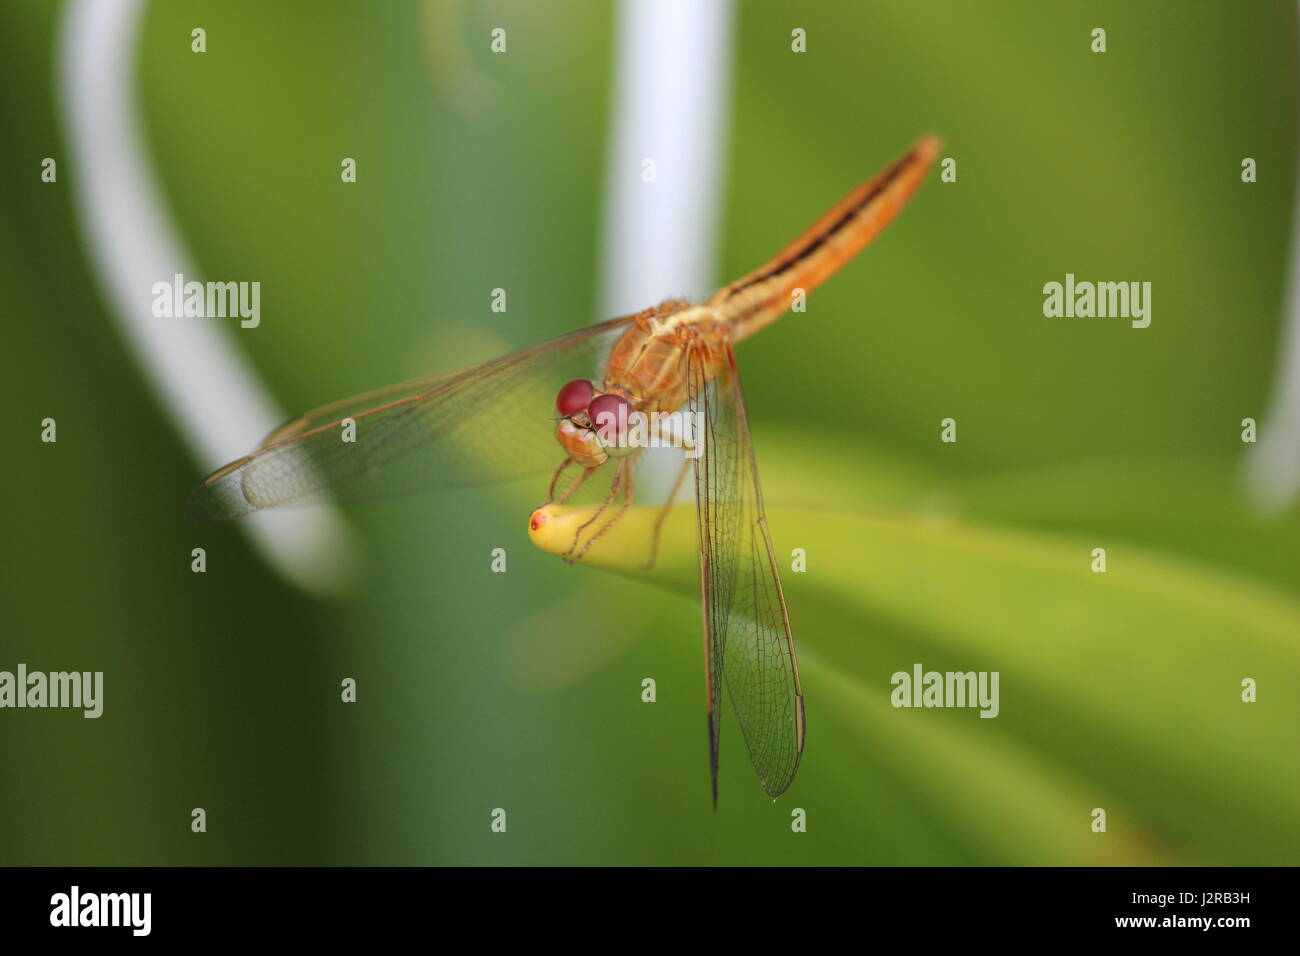 Dragonfly sitting on a plant Stock Photo